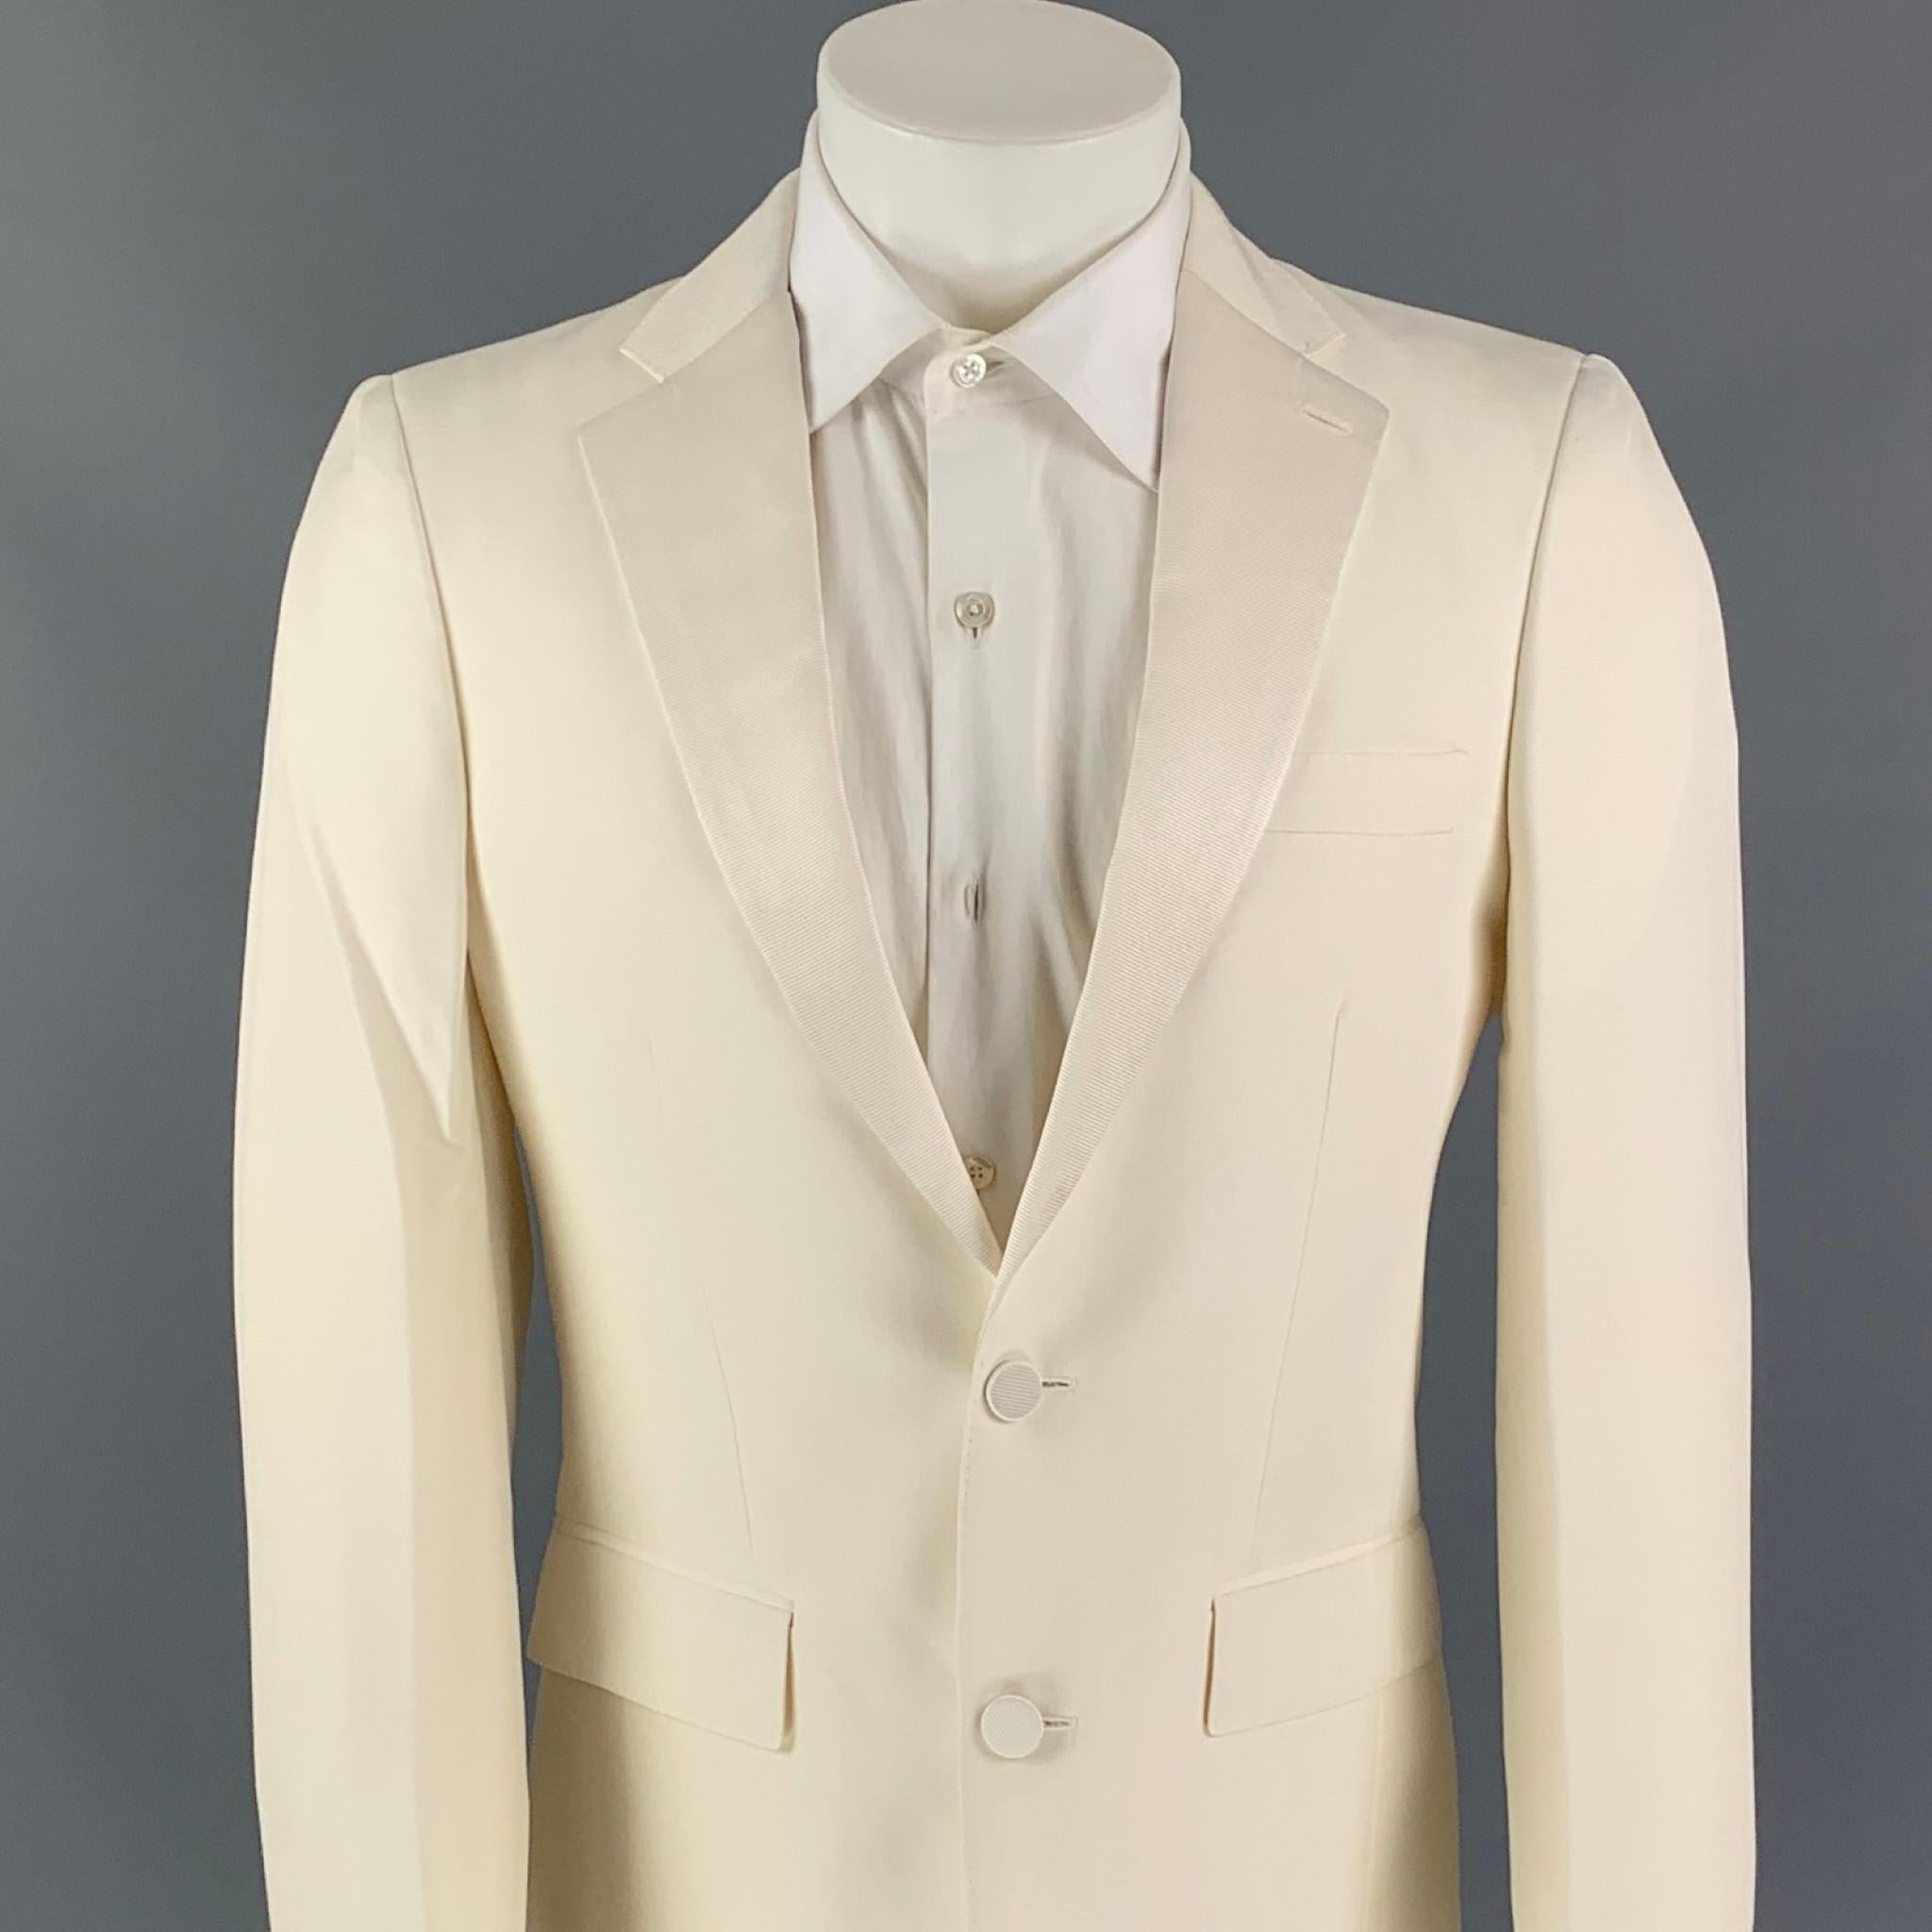 BURBERRY sport coat comes in a cream silk with a full liner featuring a notch lapel, flap pockets, double back vent, and a two button closure. Made in Italy. 

Very Good Pre-Owned Condition.
Marked: 48R

Measurements:

Shoulder: 17 in.
Chest: 38